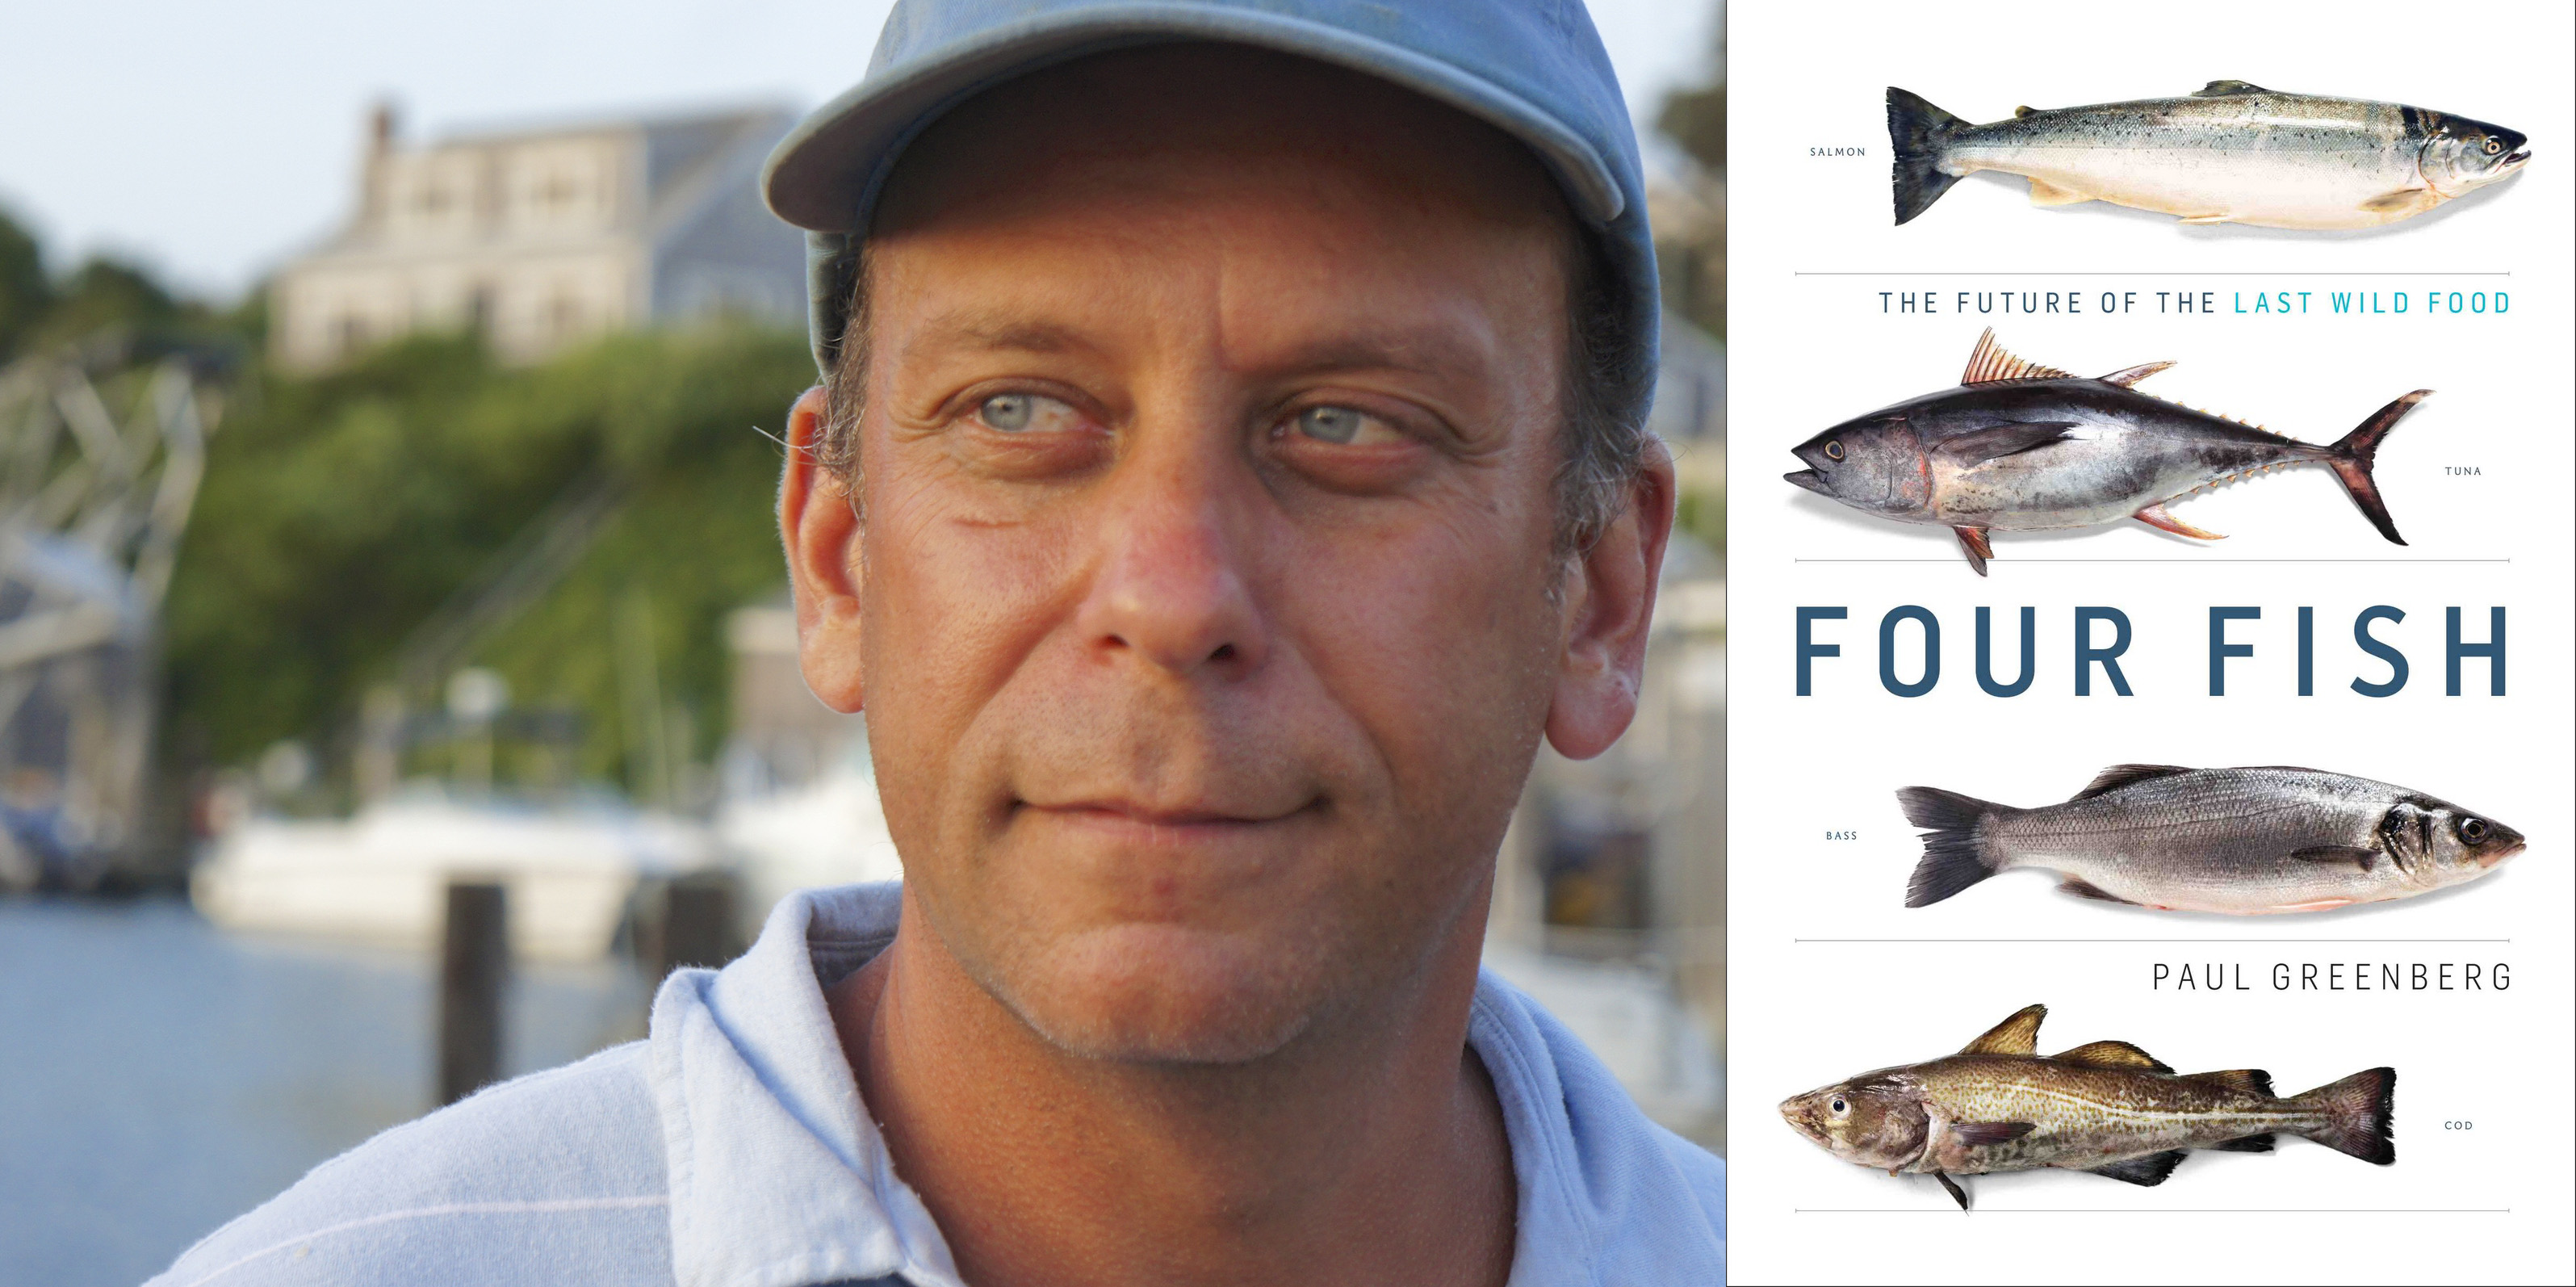 Four Fish: The Future of the Last Wild Food and its author, Paul Greenberg